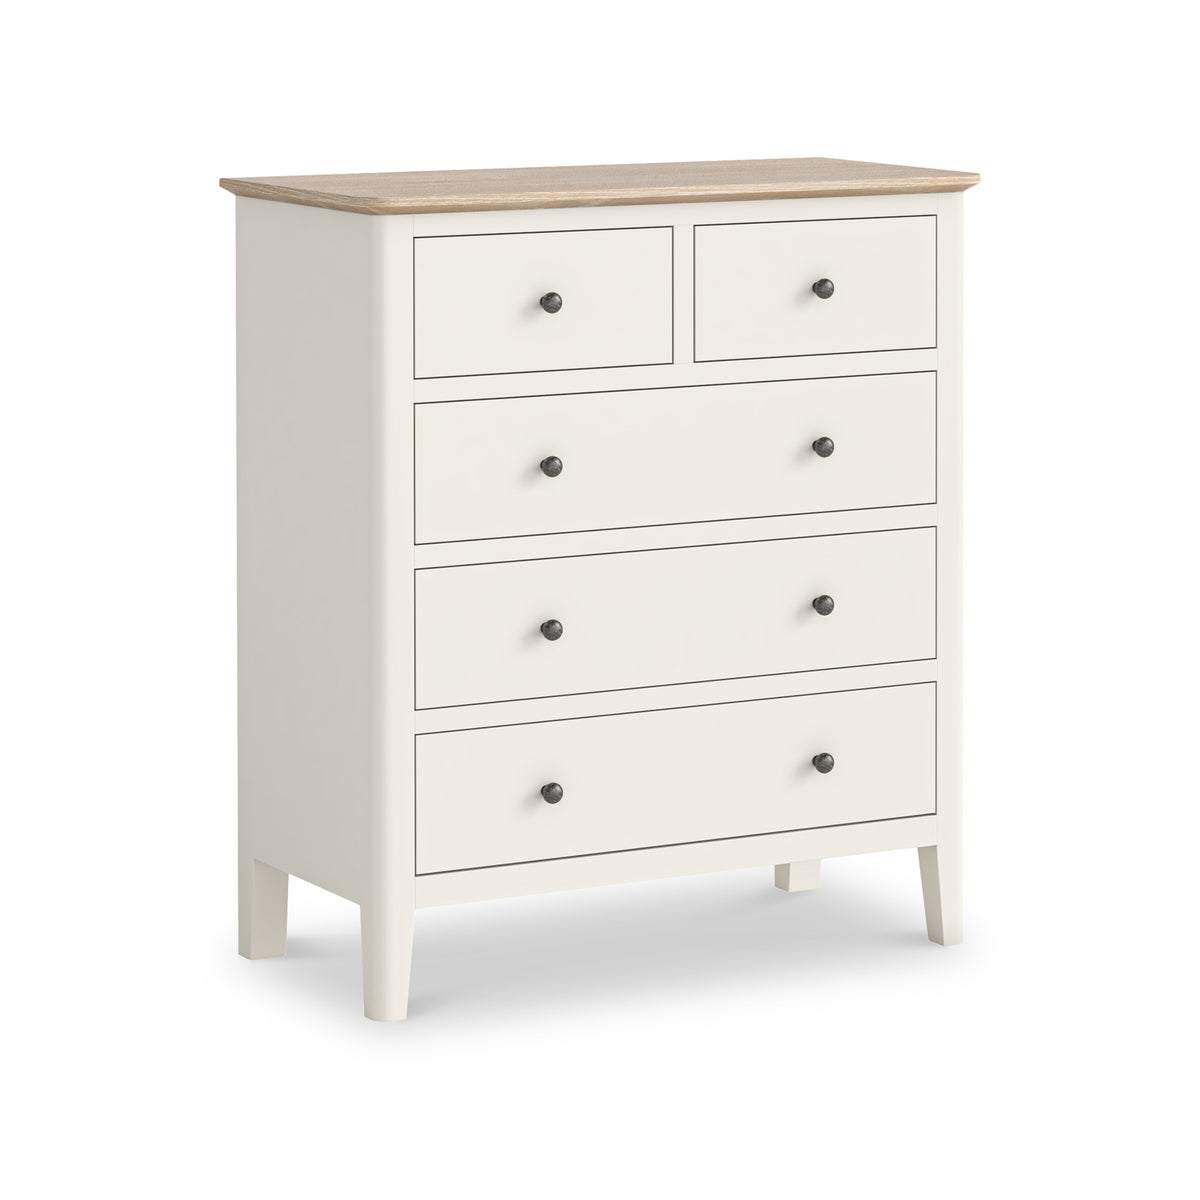 Penrose Coconut White 2 Over 3 Chest with metal handles from Roseland Furniture